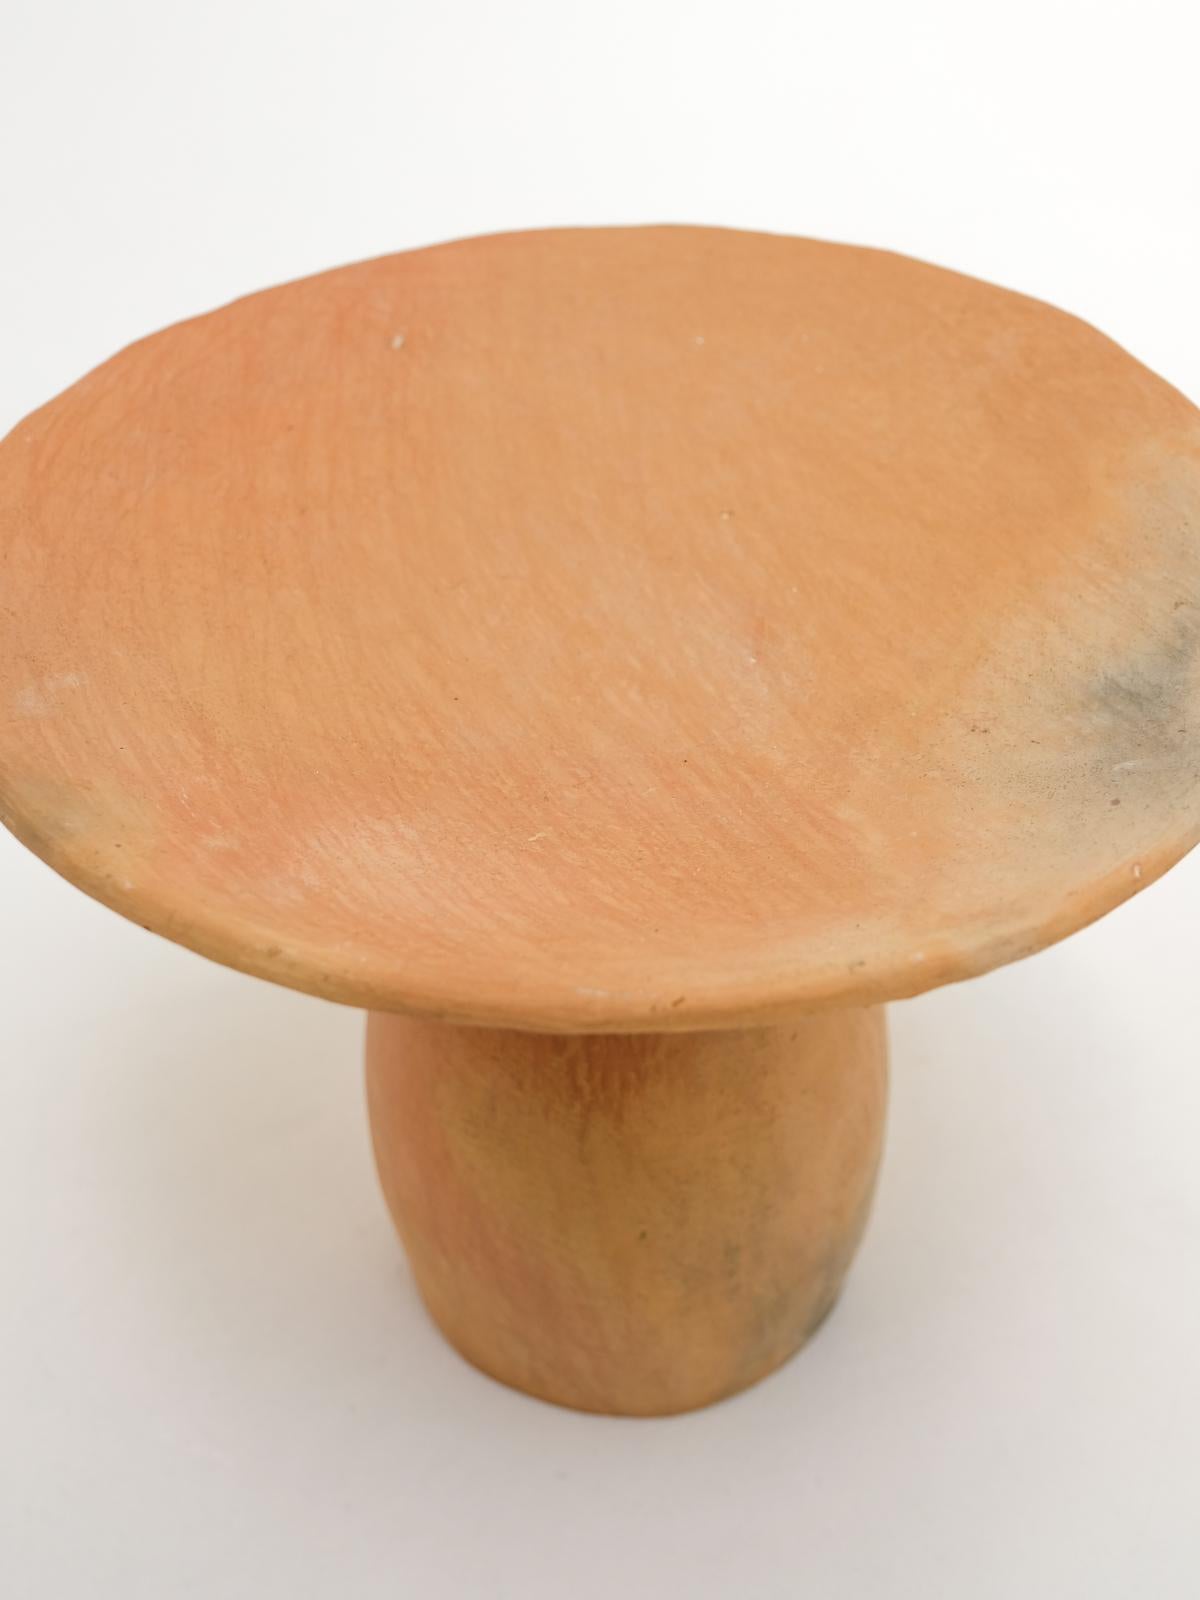 Terracotta contemporary Side Tables Made of local Clay, Handbuilt handfired For Sale 10